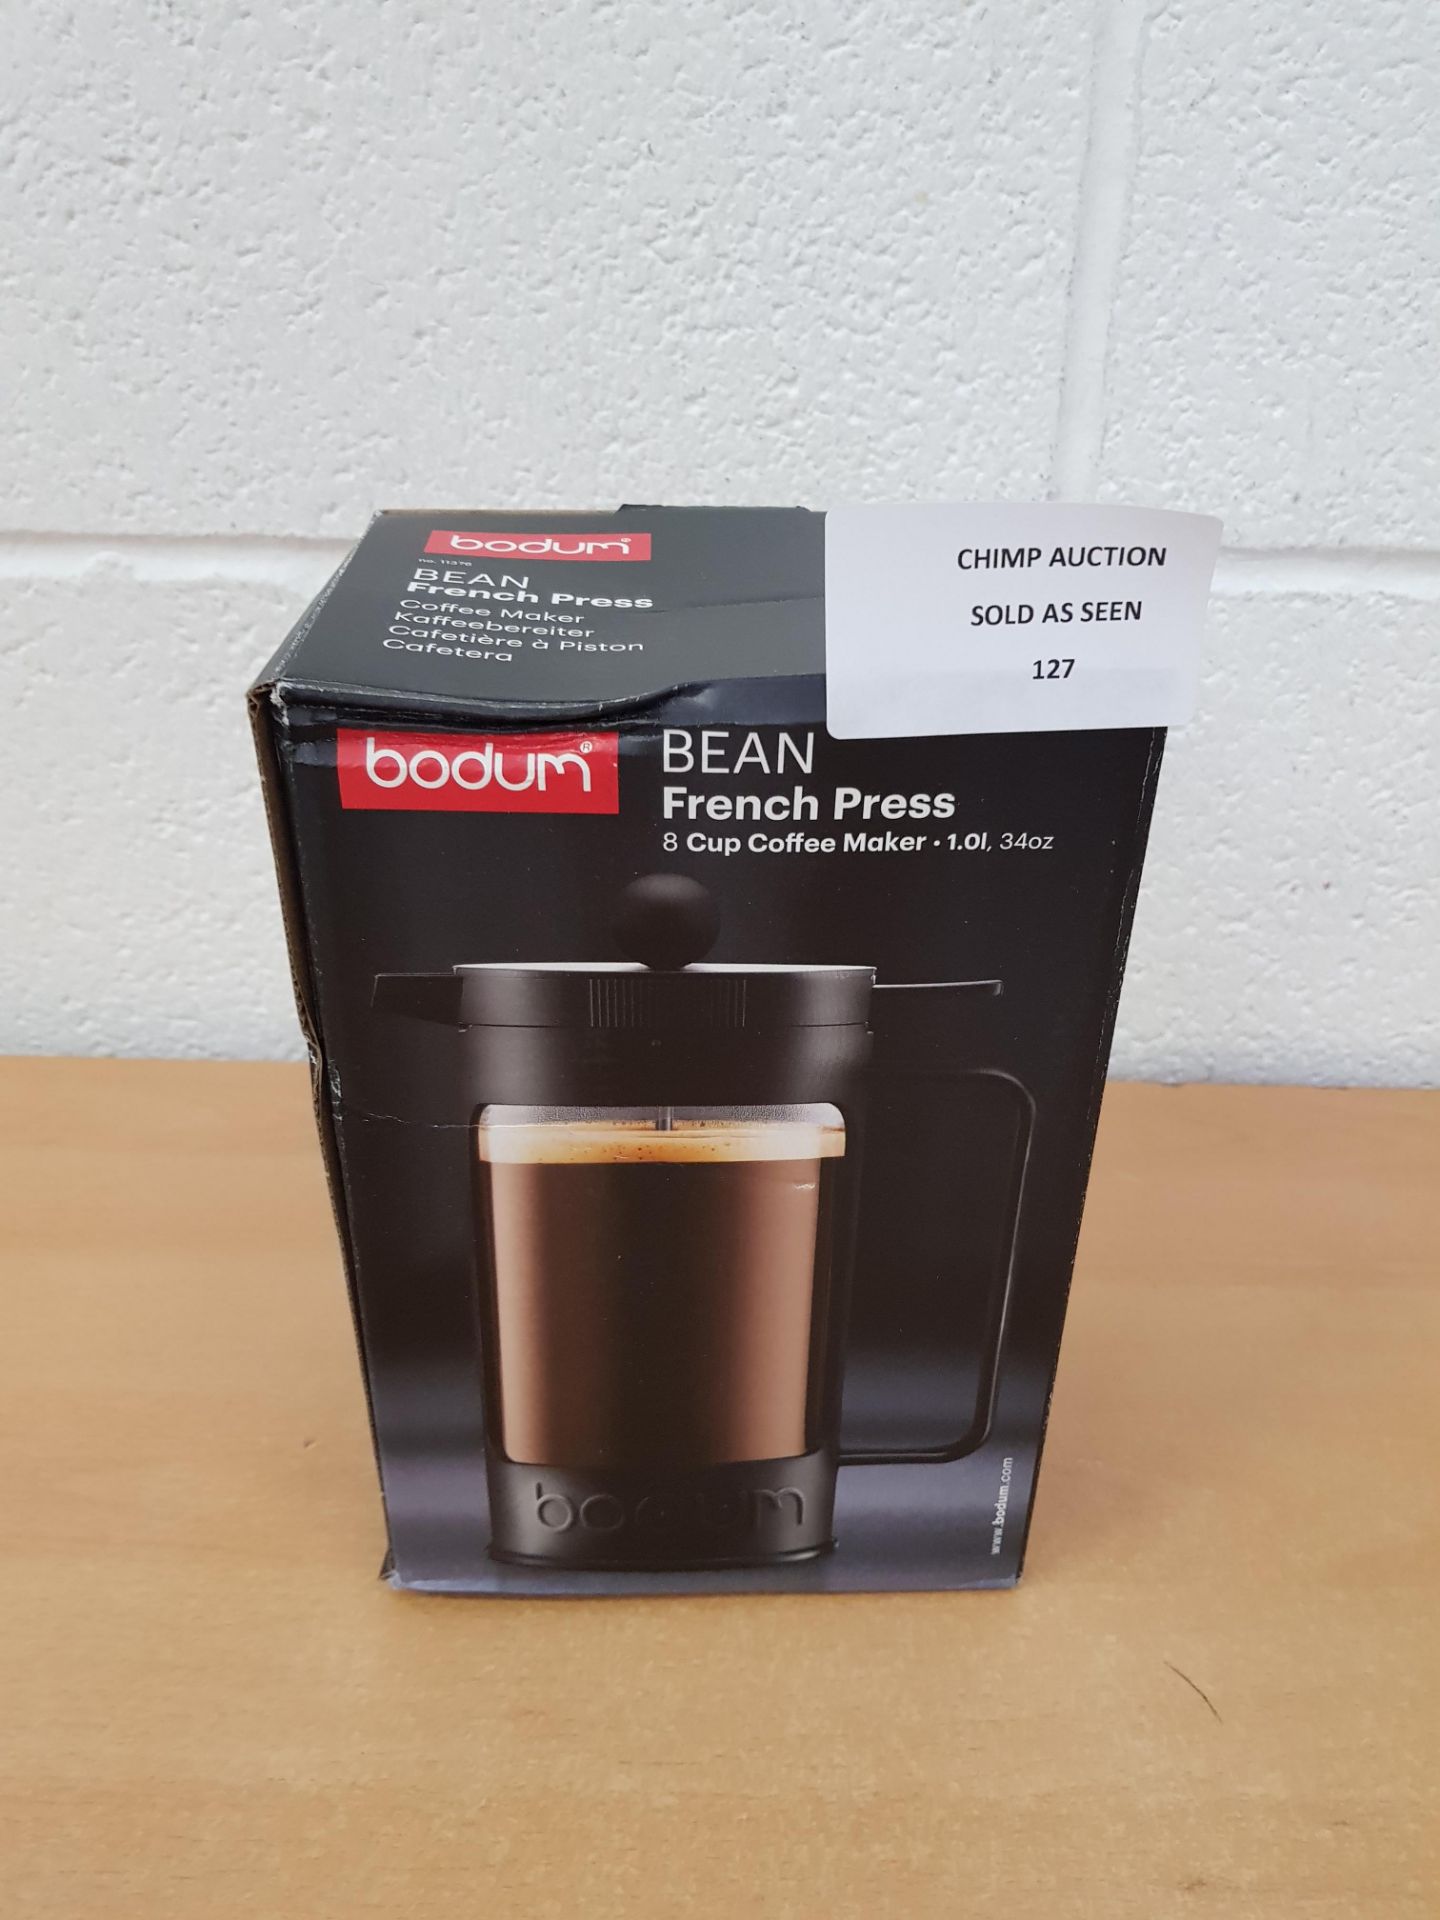 Bodum Bean French Press 8 Cup coffee maker